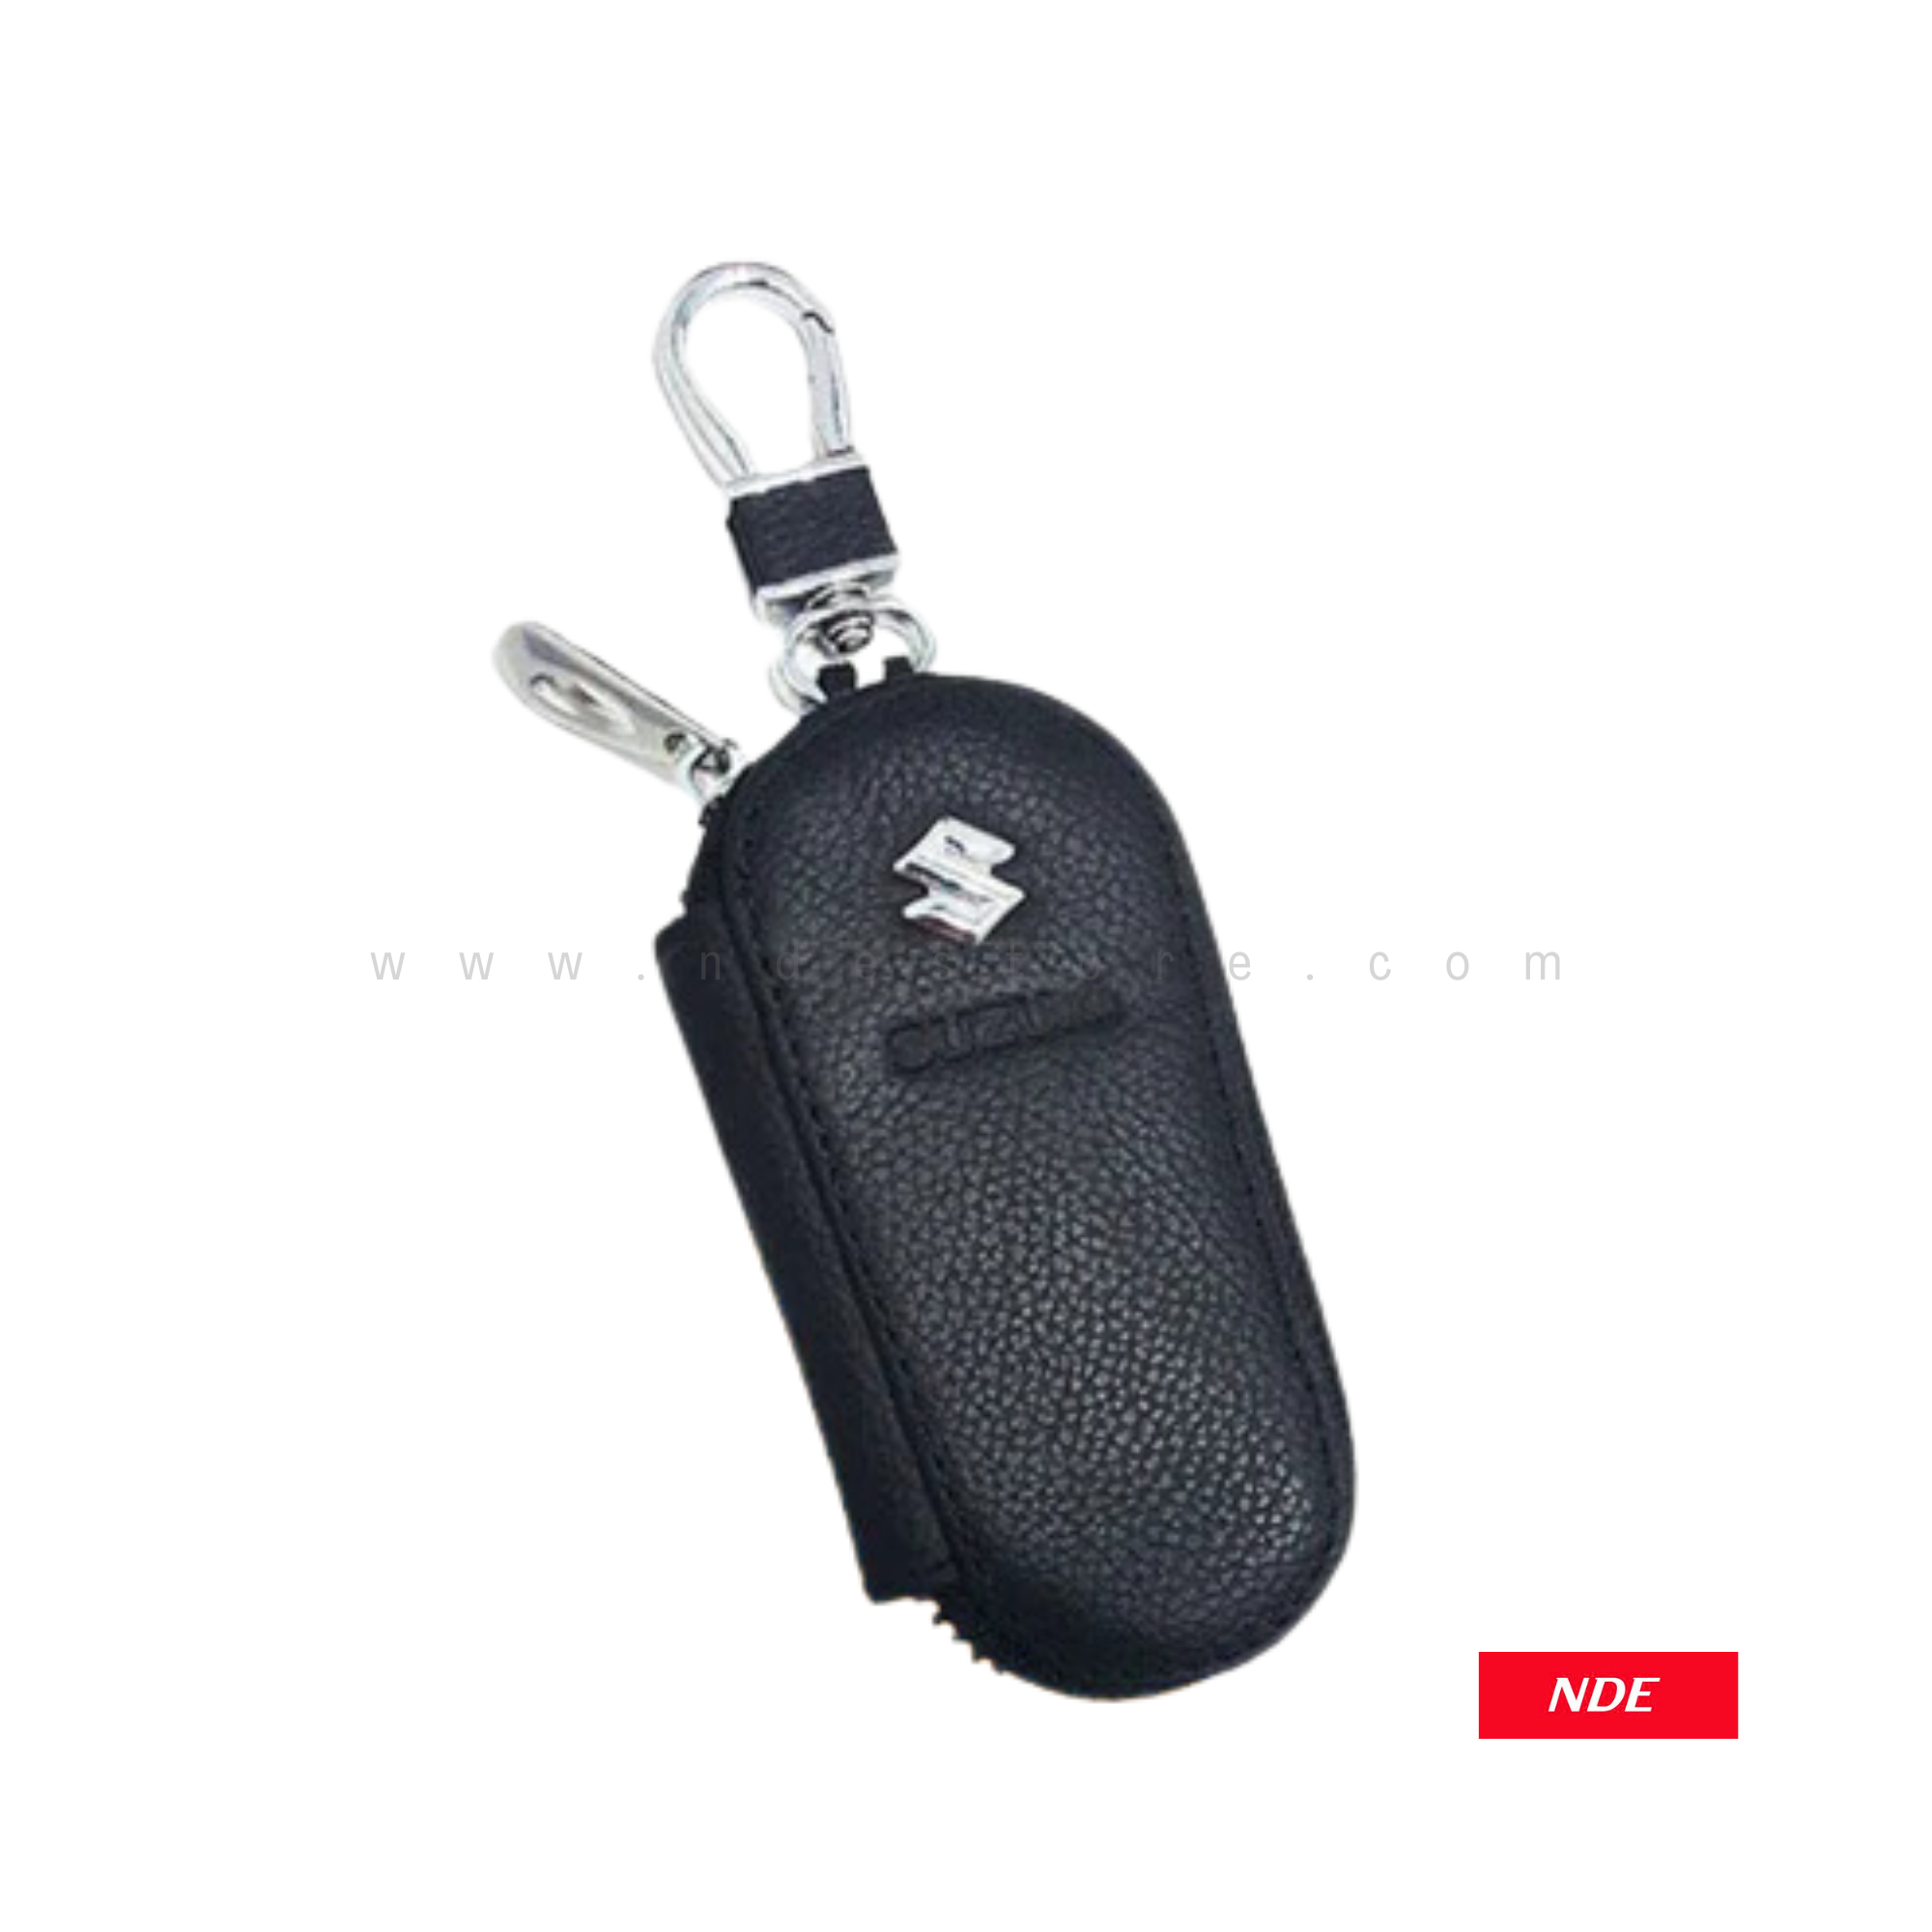 REMOTE COVER KEY POUCH PREMIUM LEATHER MATERIAL WITH SUZUKI LOGO (MADE IN CHINA)